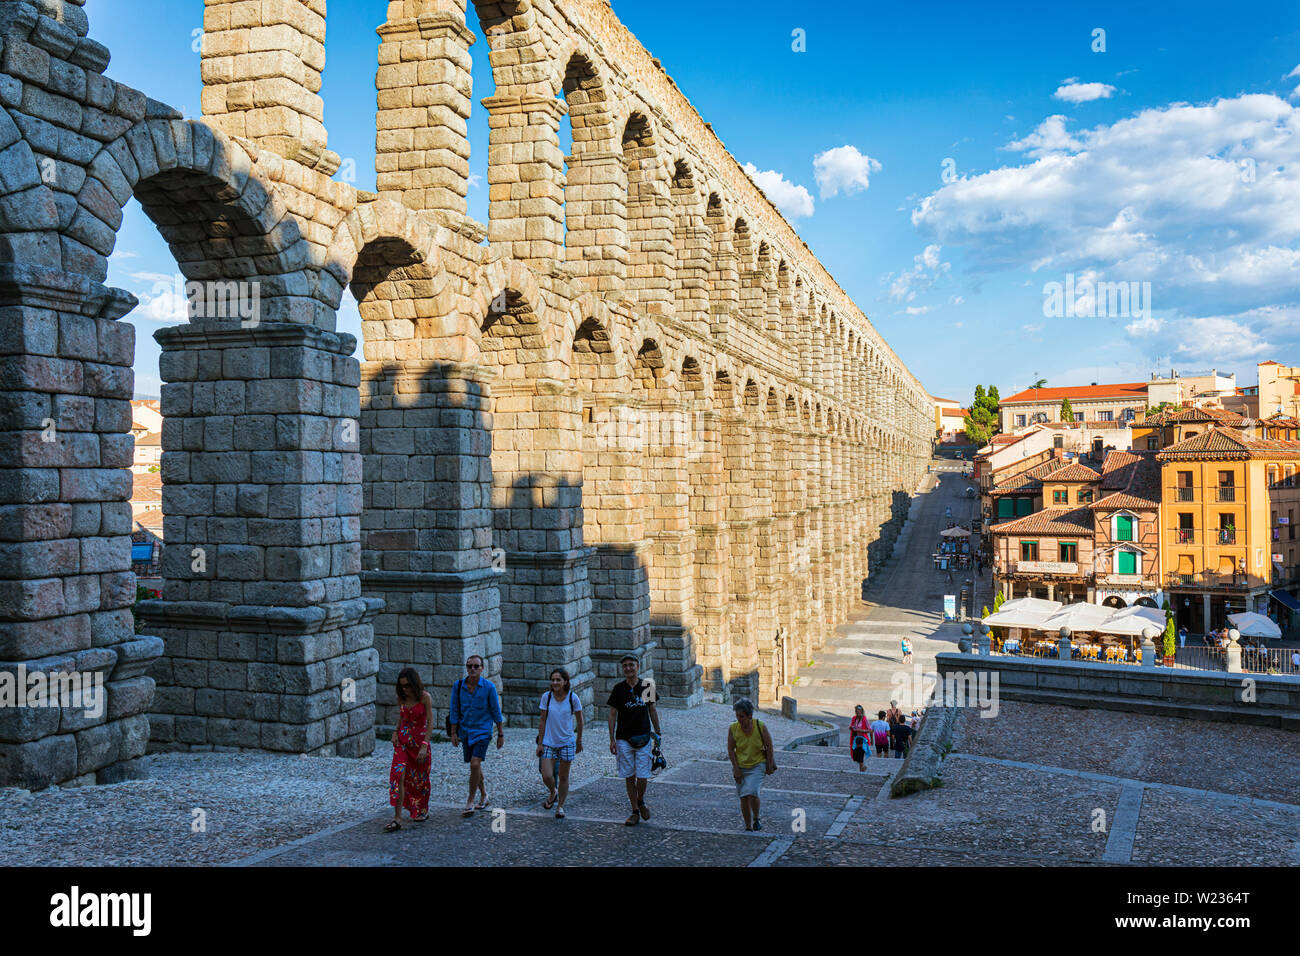 Segovia, Segovia Province, Castile and Leon, Spain.  The Roman Aqueduct in Plaza del Azoguejo which dates from the 1st or 2nd century AD.  The Old Tow Stock Photo